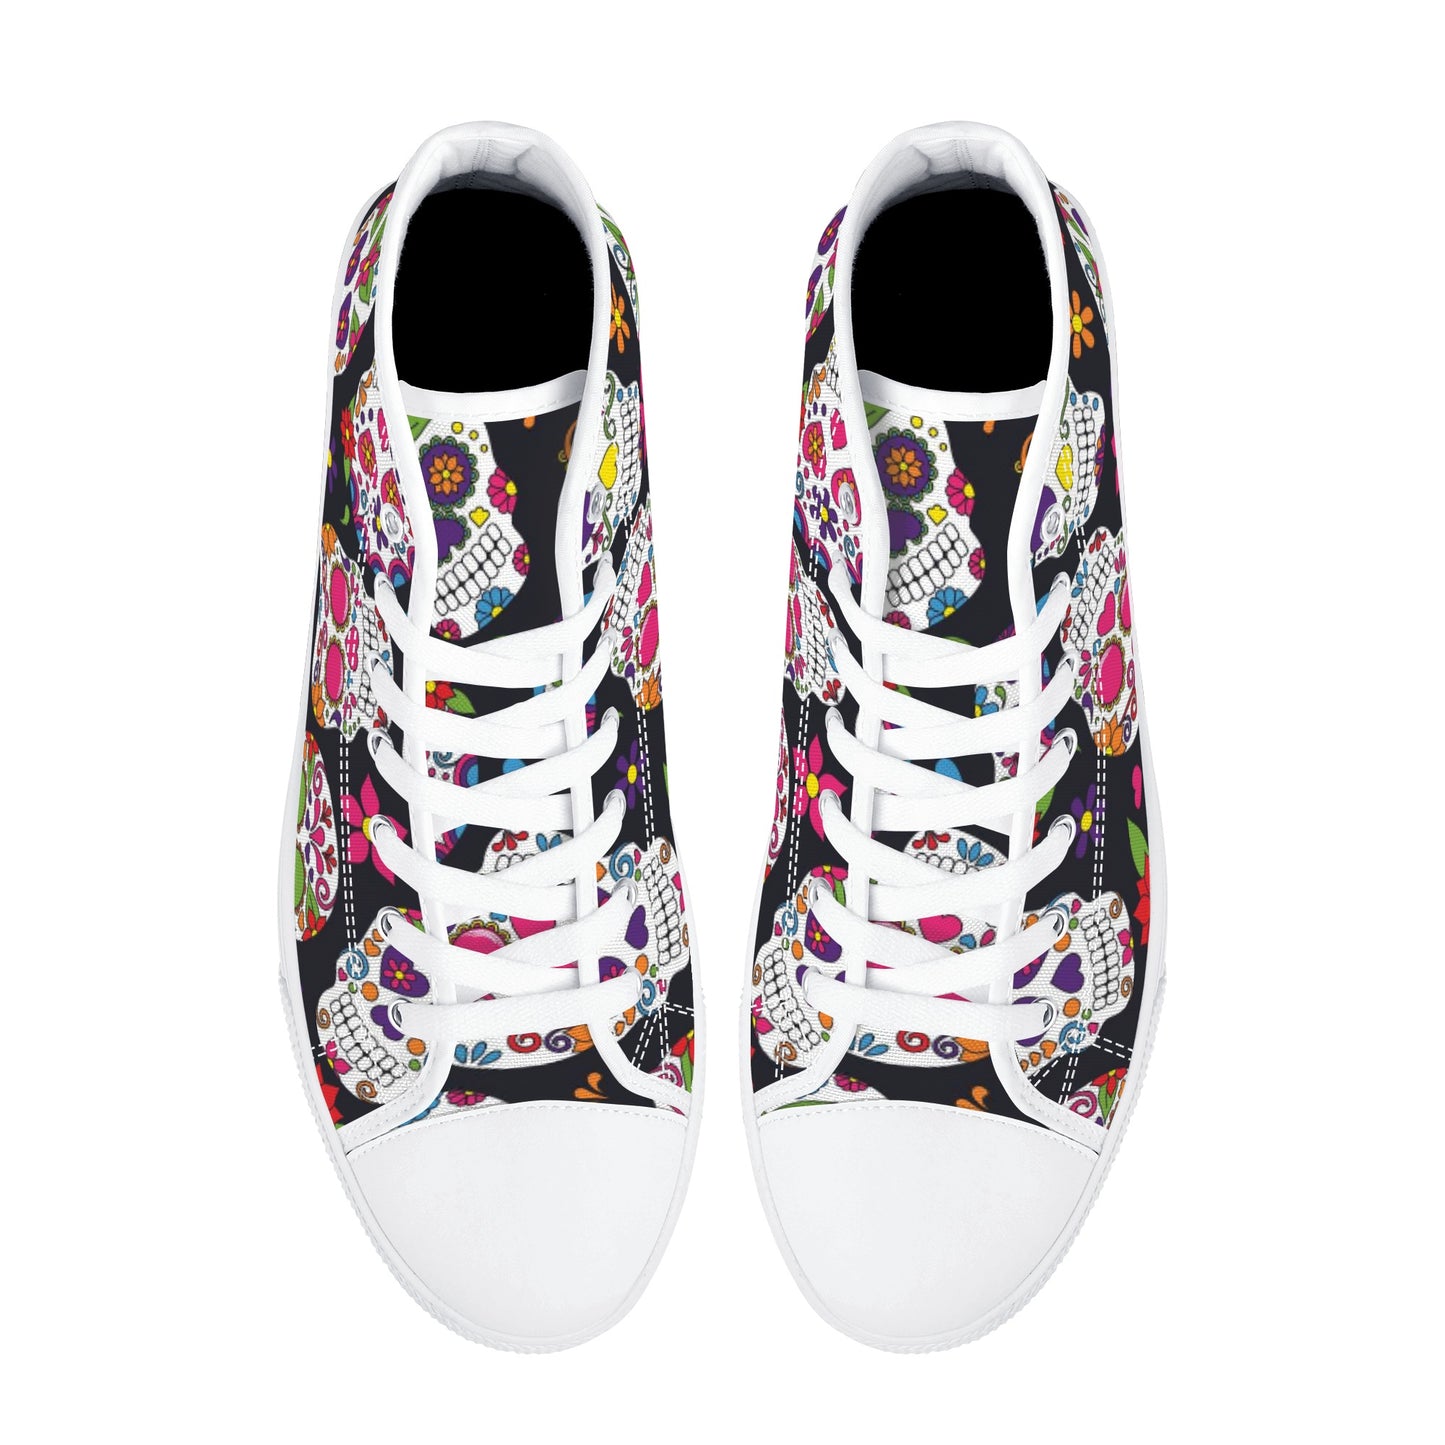 Sugar skull Mexican skull pattern Men's High Top Canvas Shoes With Customized Tongue